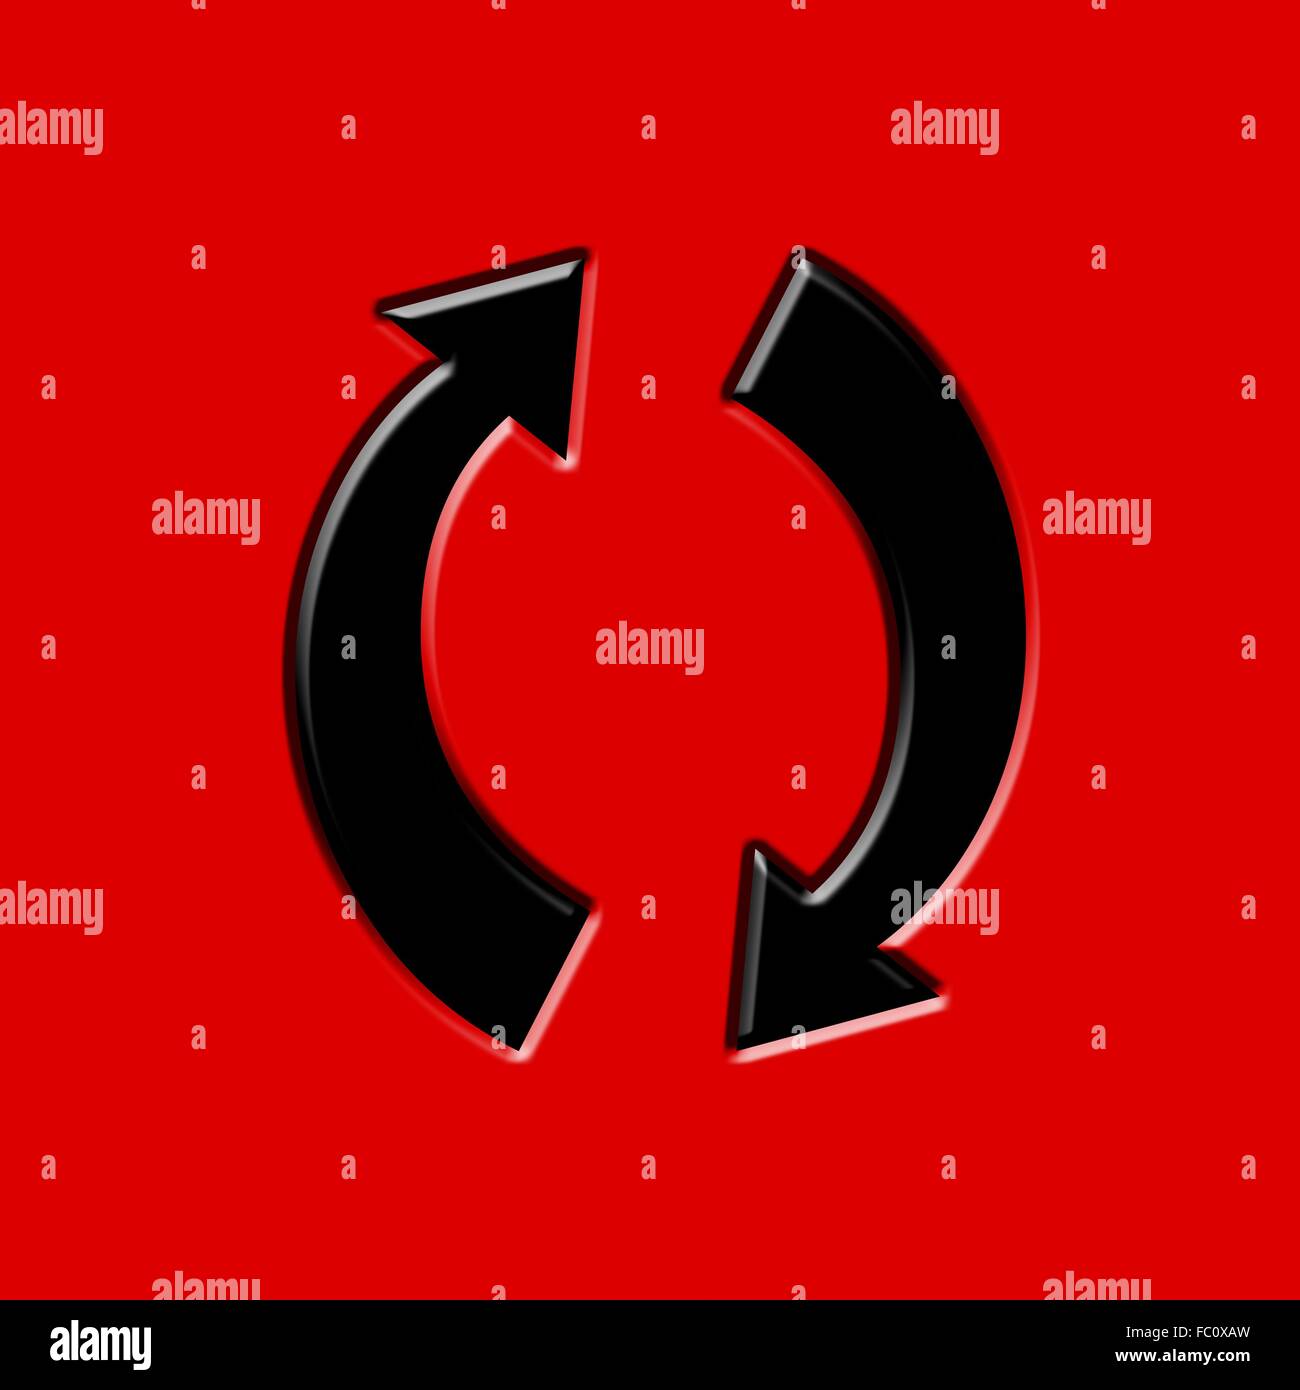 black circular arrows on red background Stock Photo